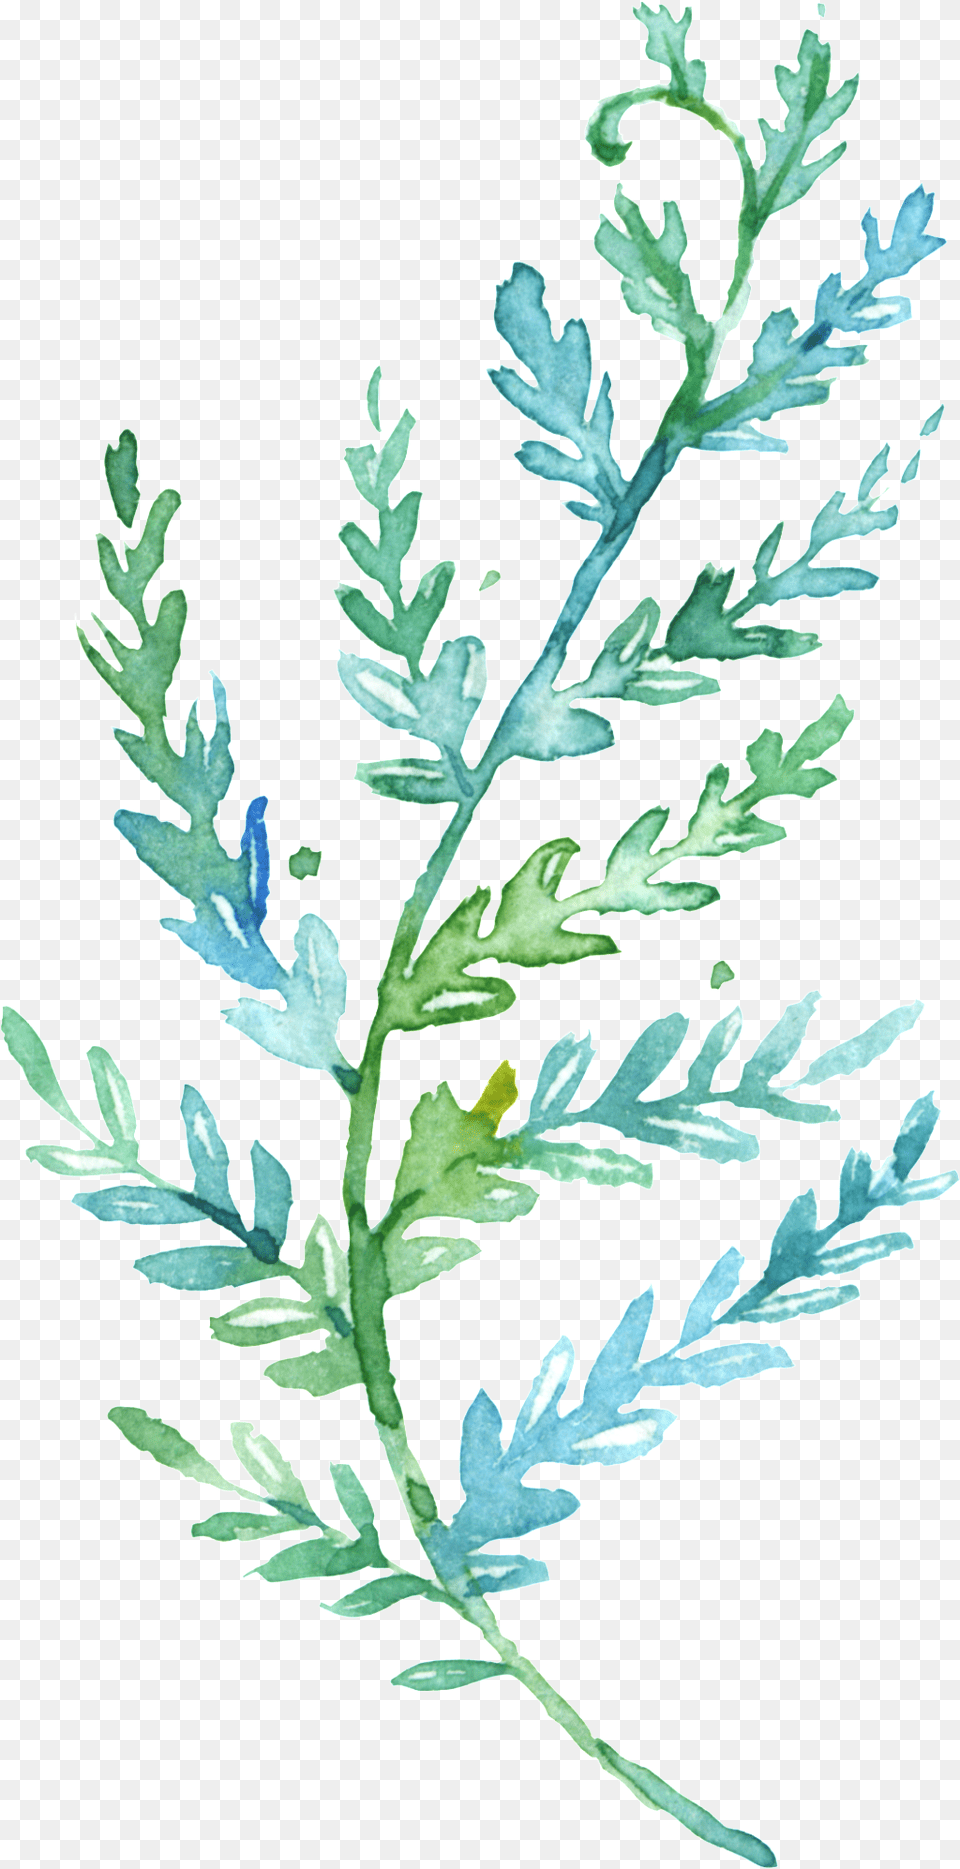 This Backgrounds Is Elegant Green Watercolor Branches Garten Blumewatercolorwreath Hochzeits Karte Karte, Herbal, Herbs, Leaf, Plant Free Transparent Png